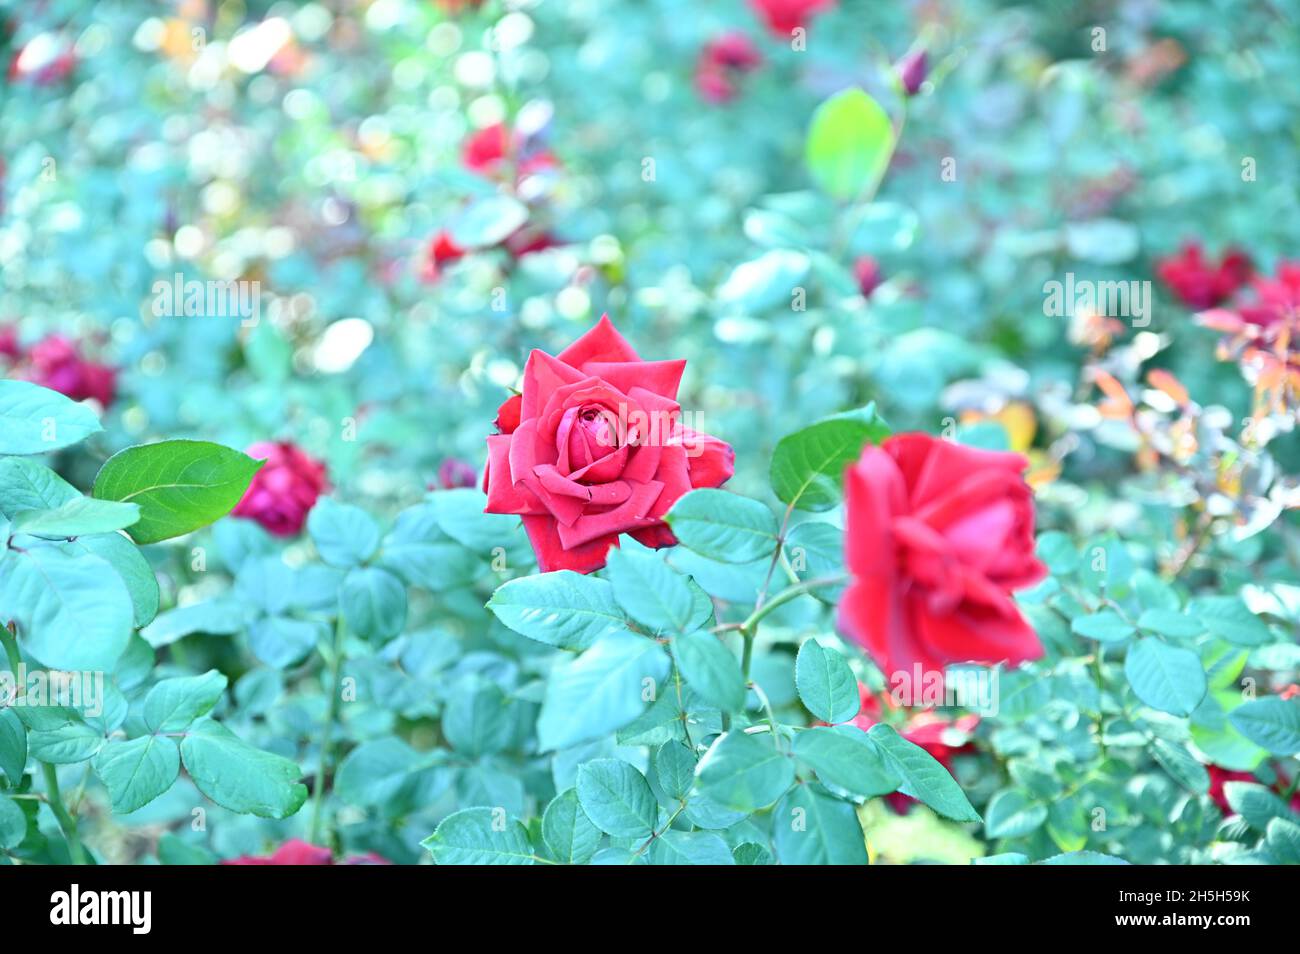 Looking at the beautiful red rose in the garden, I can feel the feeling of love. Stock Photo